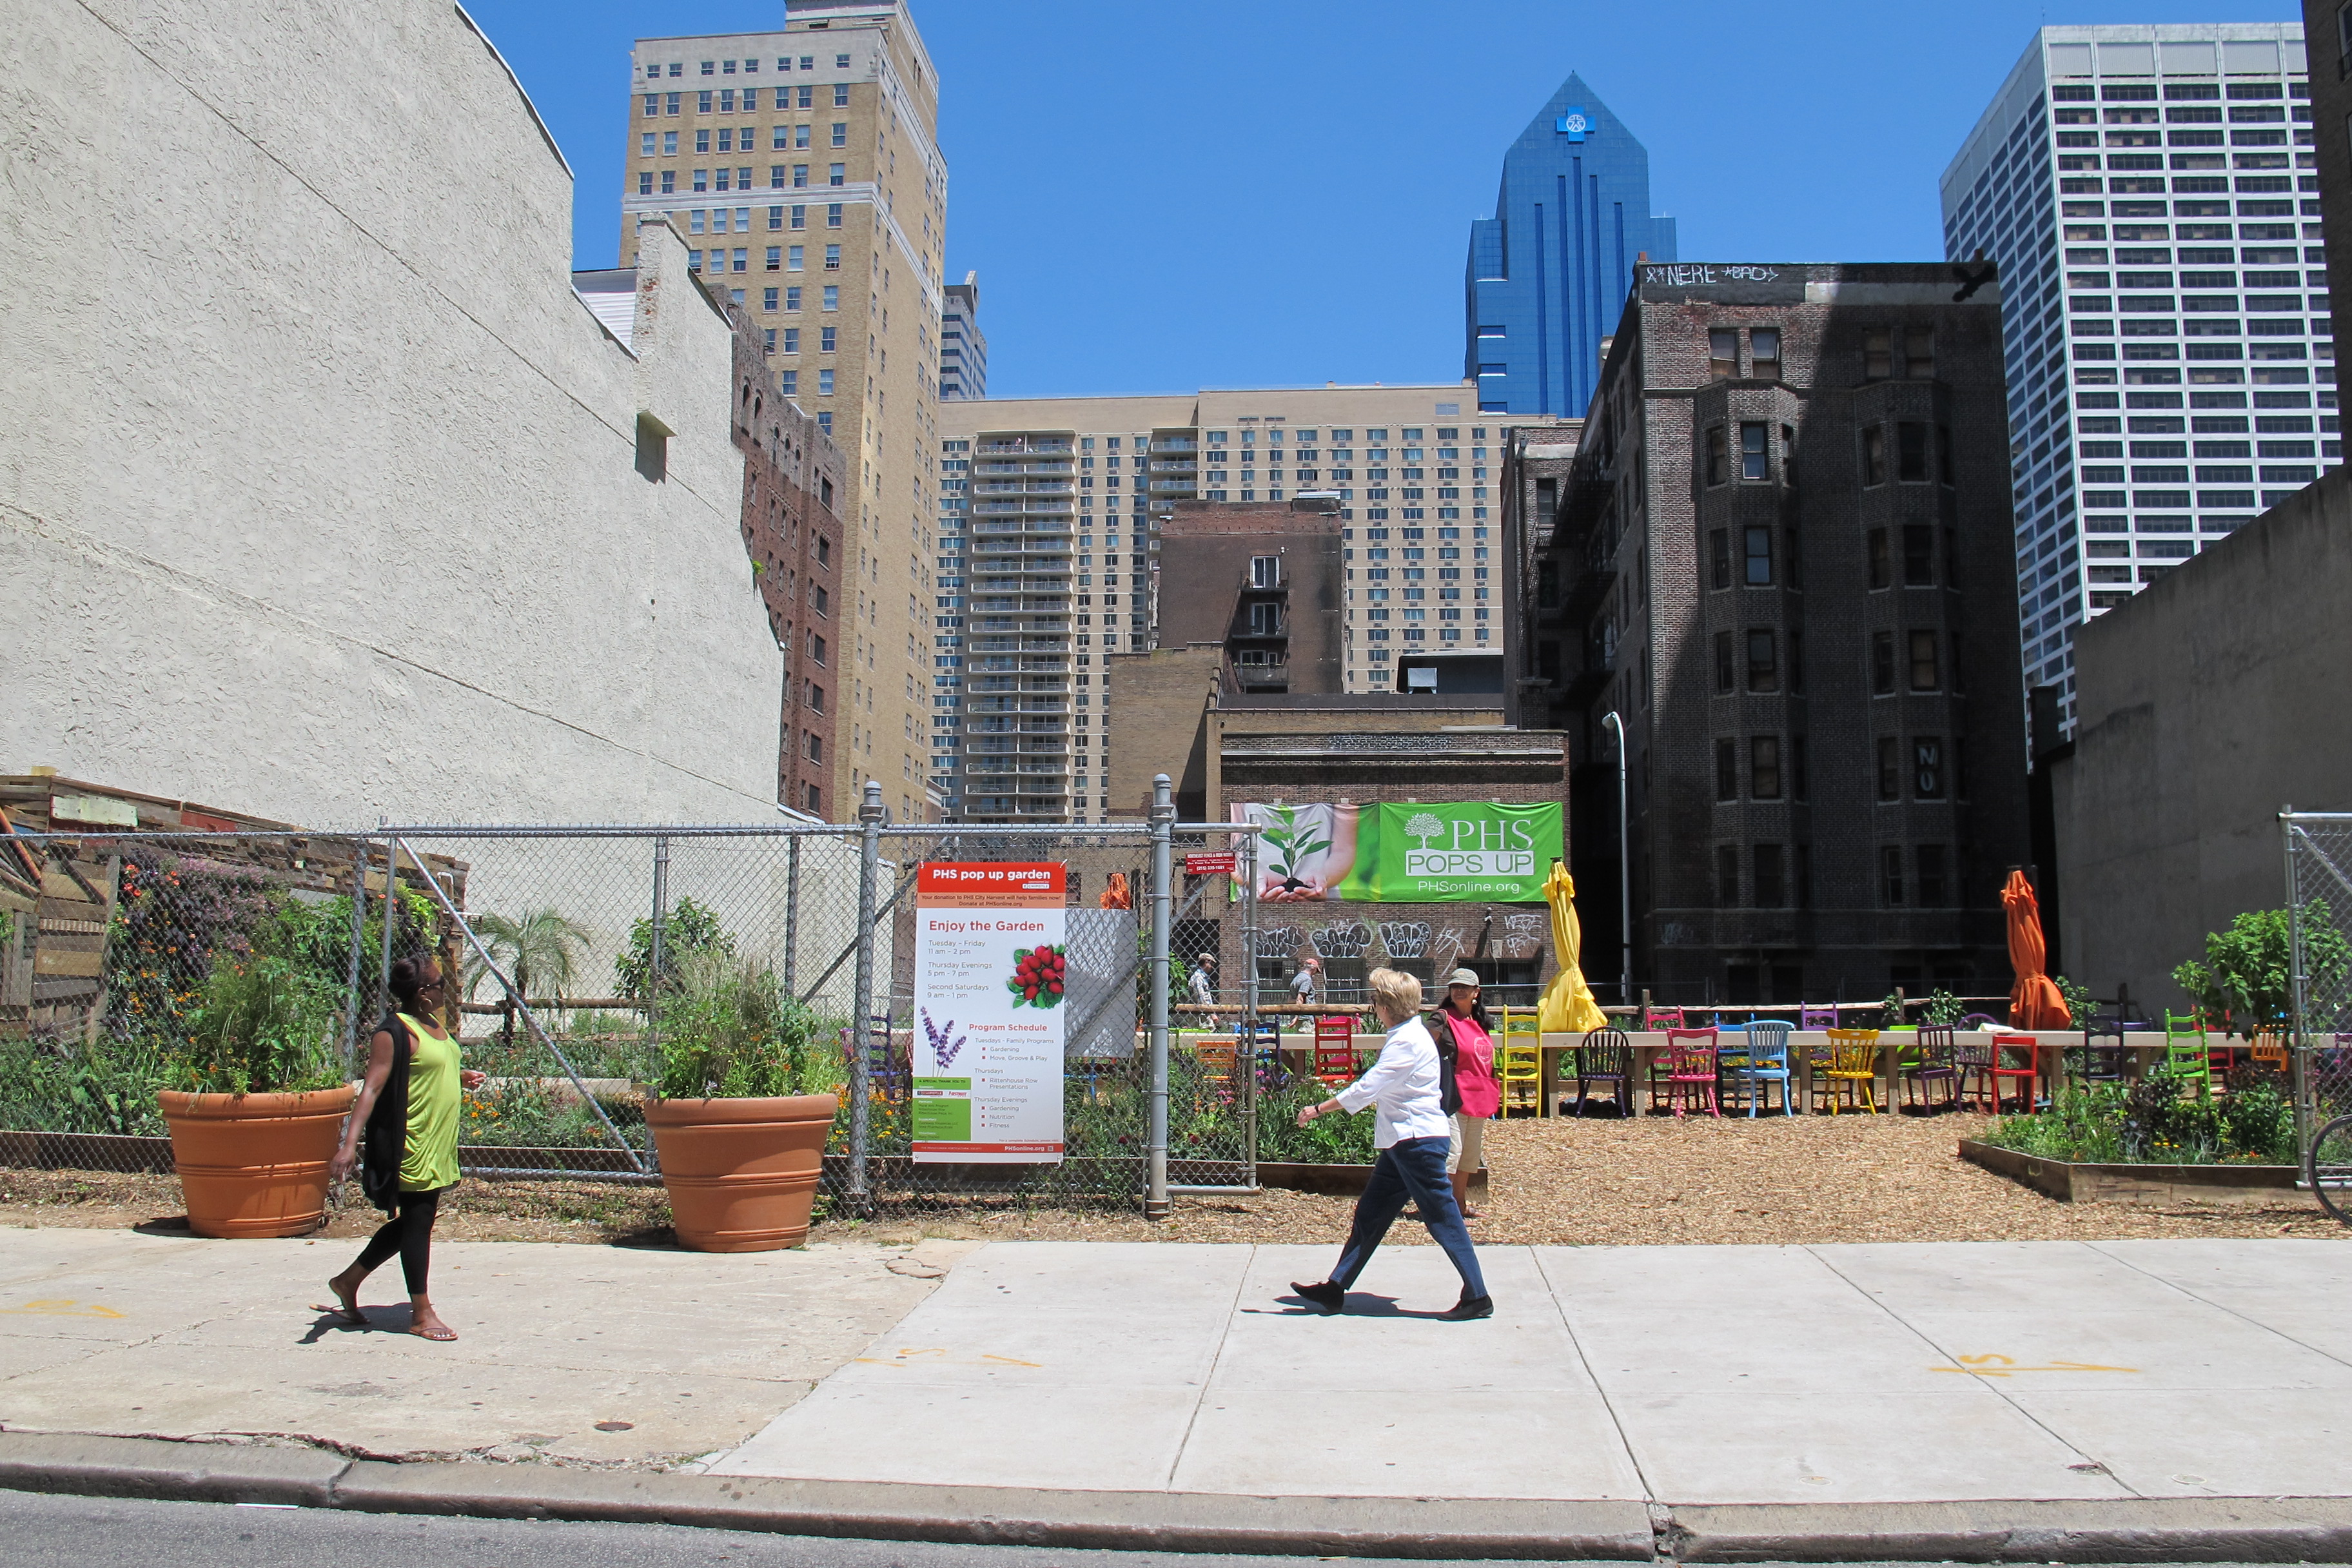 PHS Pops-Up Garden has taken over a vacant property on the 1900 block of Walnut Street.